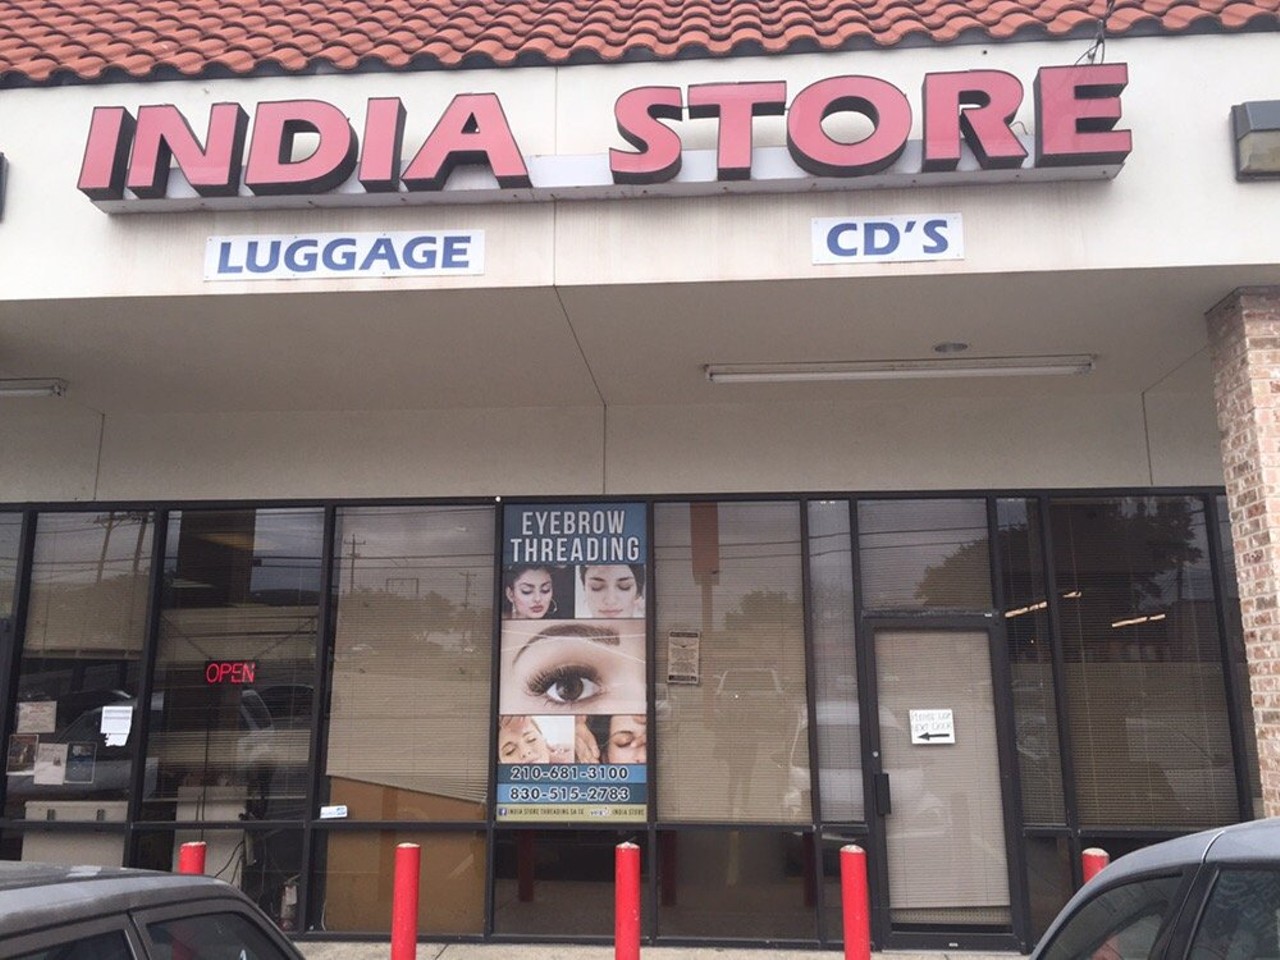 India Store
5751 Evers Rd,  (210) 681-3100, Mon.-Fri., Sun.:11am-4:30pm, Sat.:11am-6pm
India Store is stocked with South Asian favorites, including an aisle dedicated to spices, every conceivable variety of rice, dates and more. Rumor has it that Paru's eyebrow threading shop in the back of the store is the best in town.
Yelp/India Store